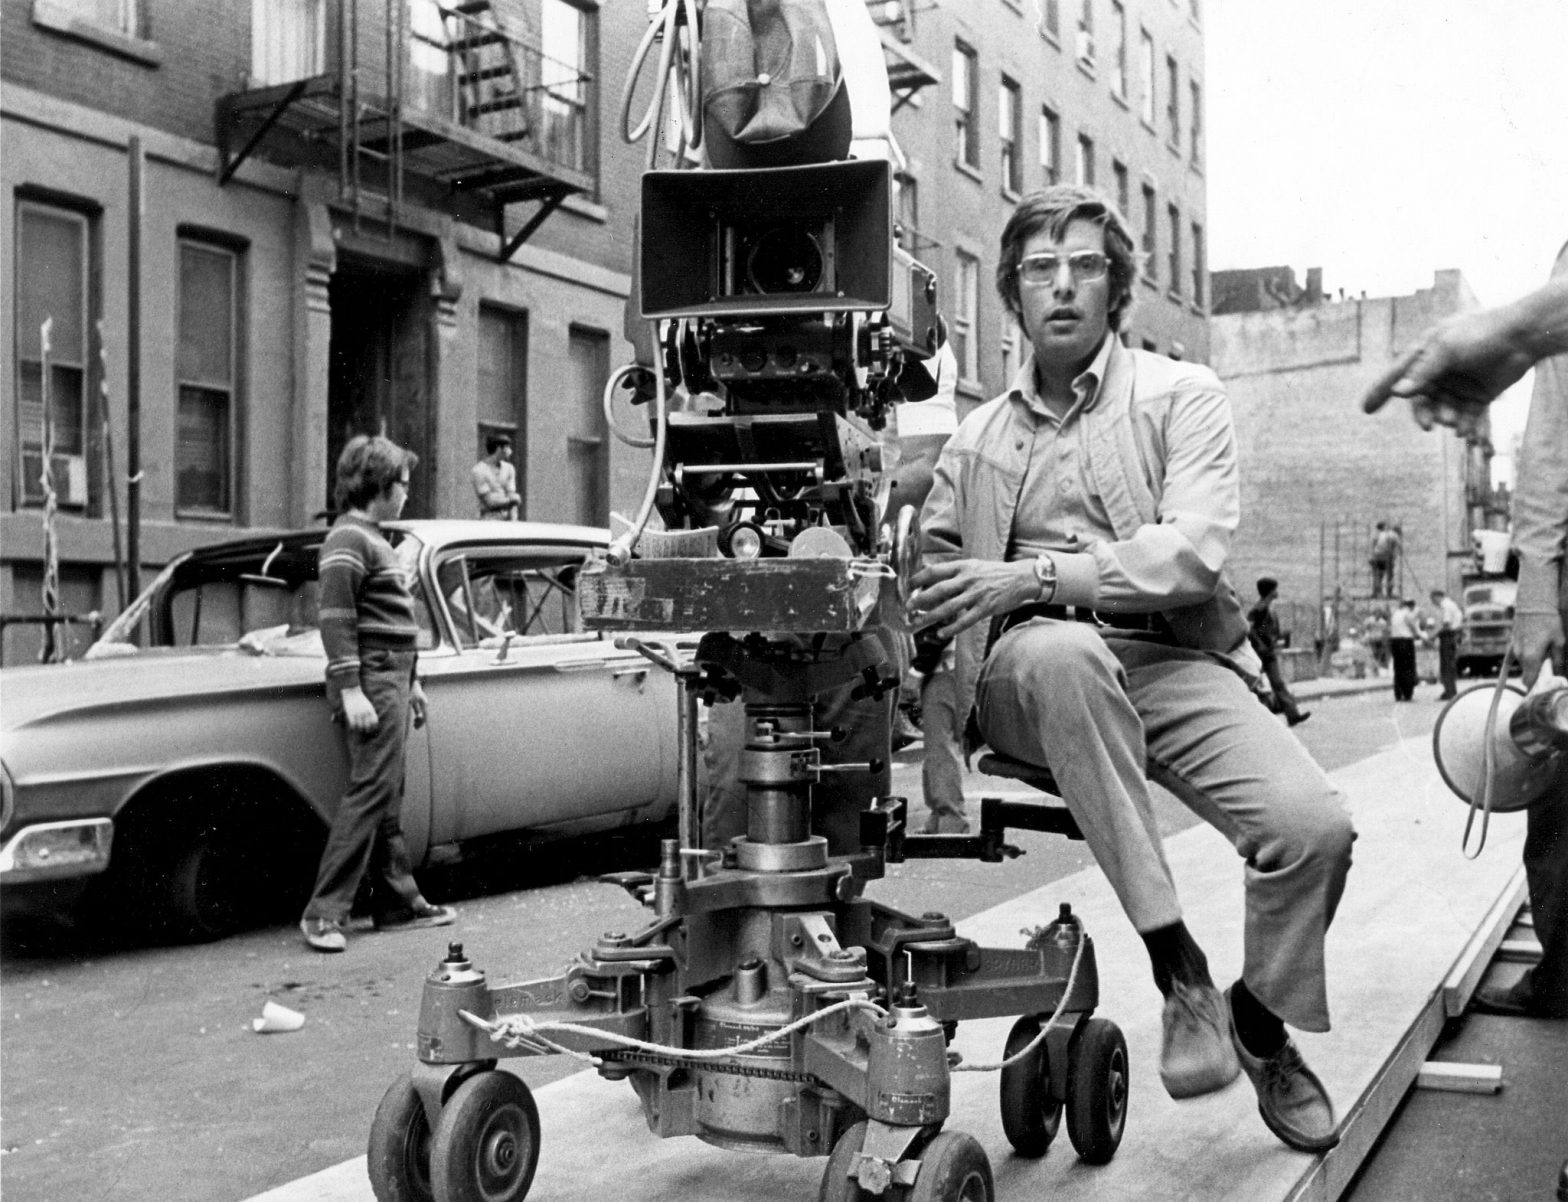 Top 5 movies directed by William Friedkin